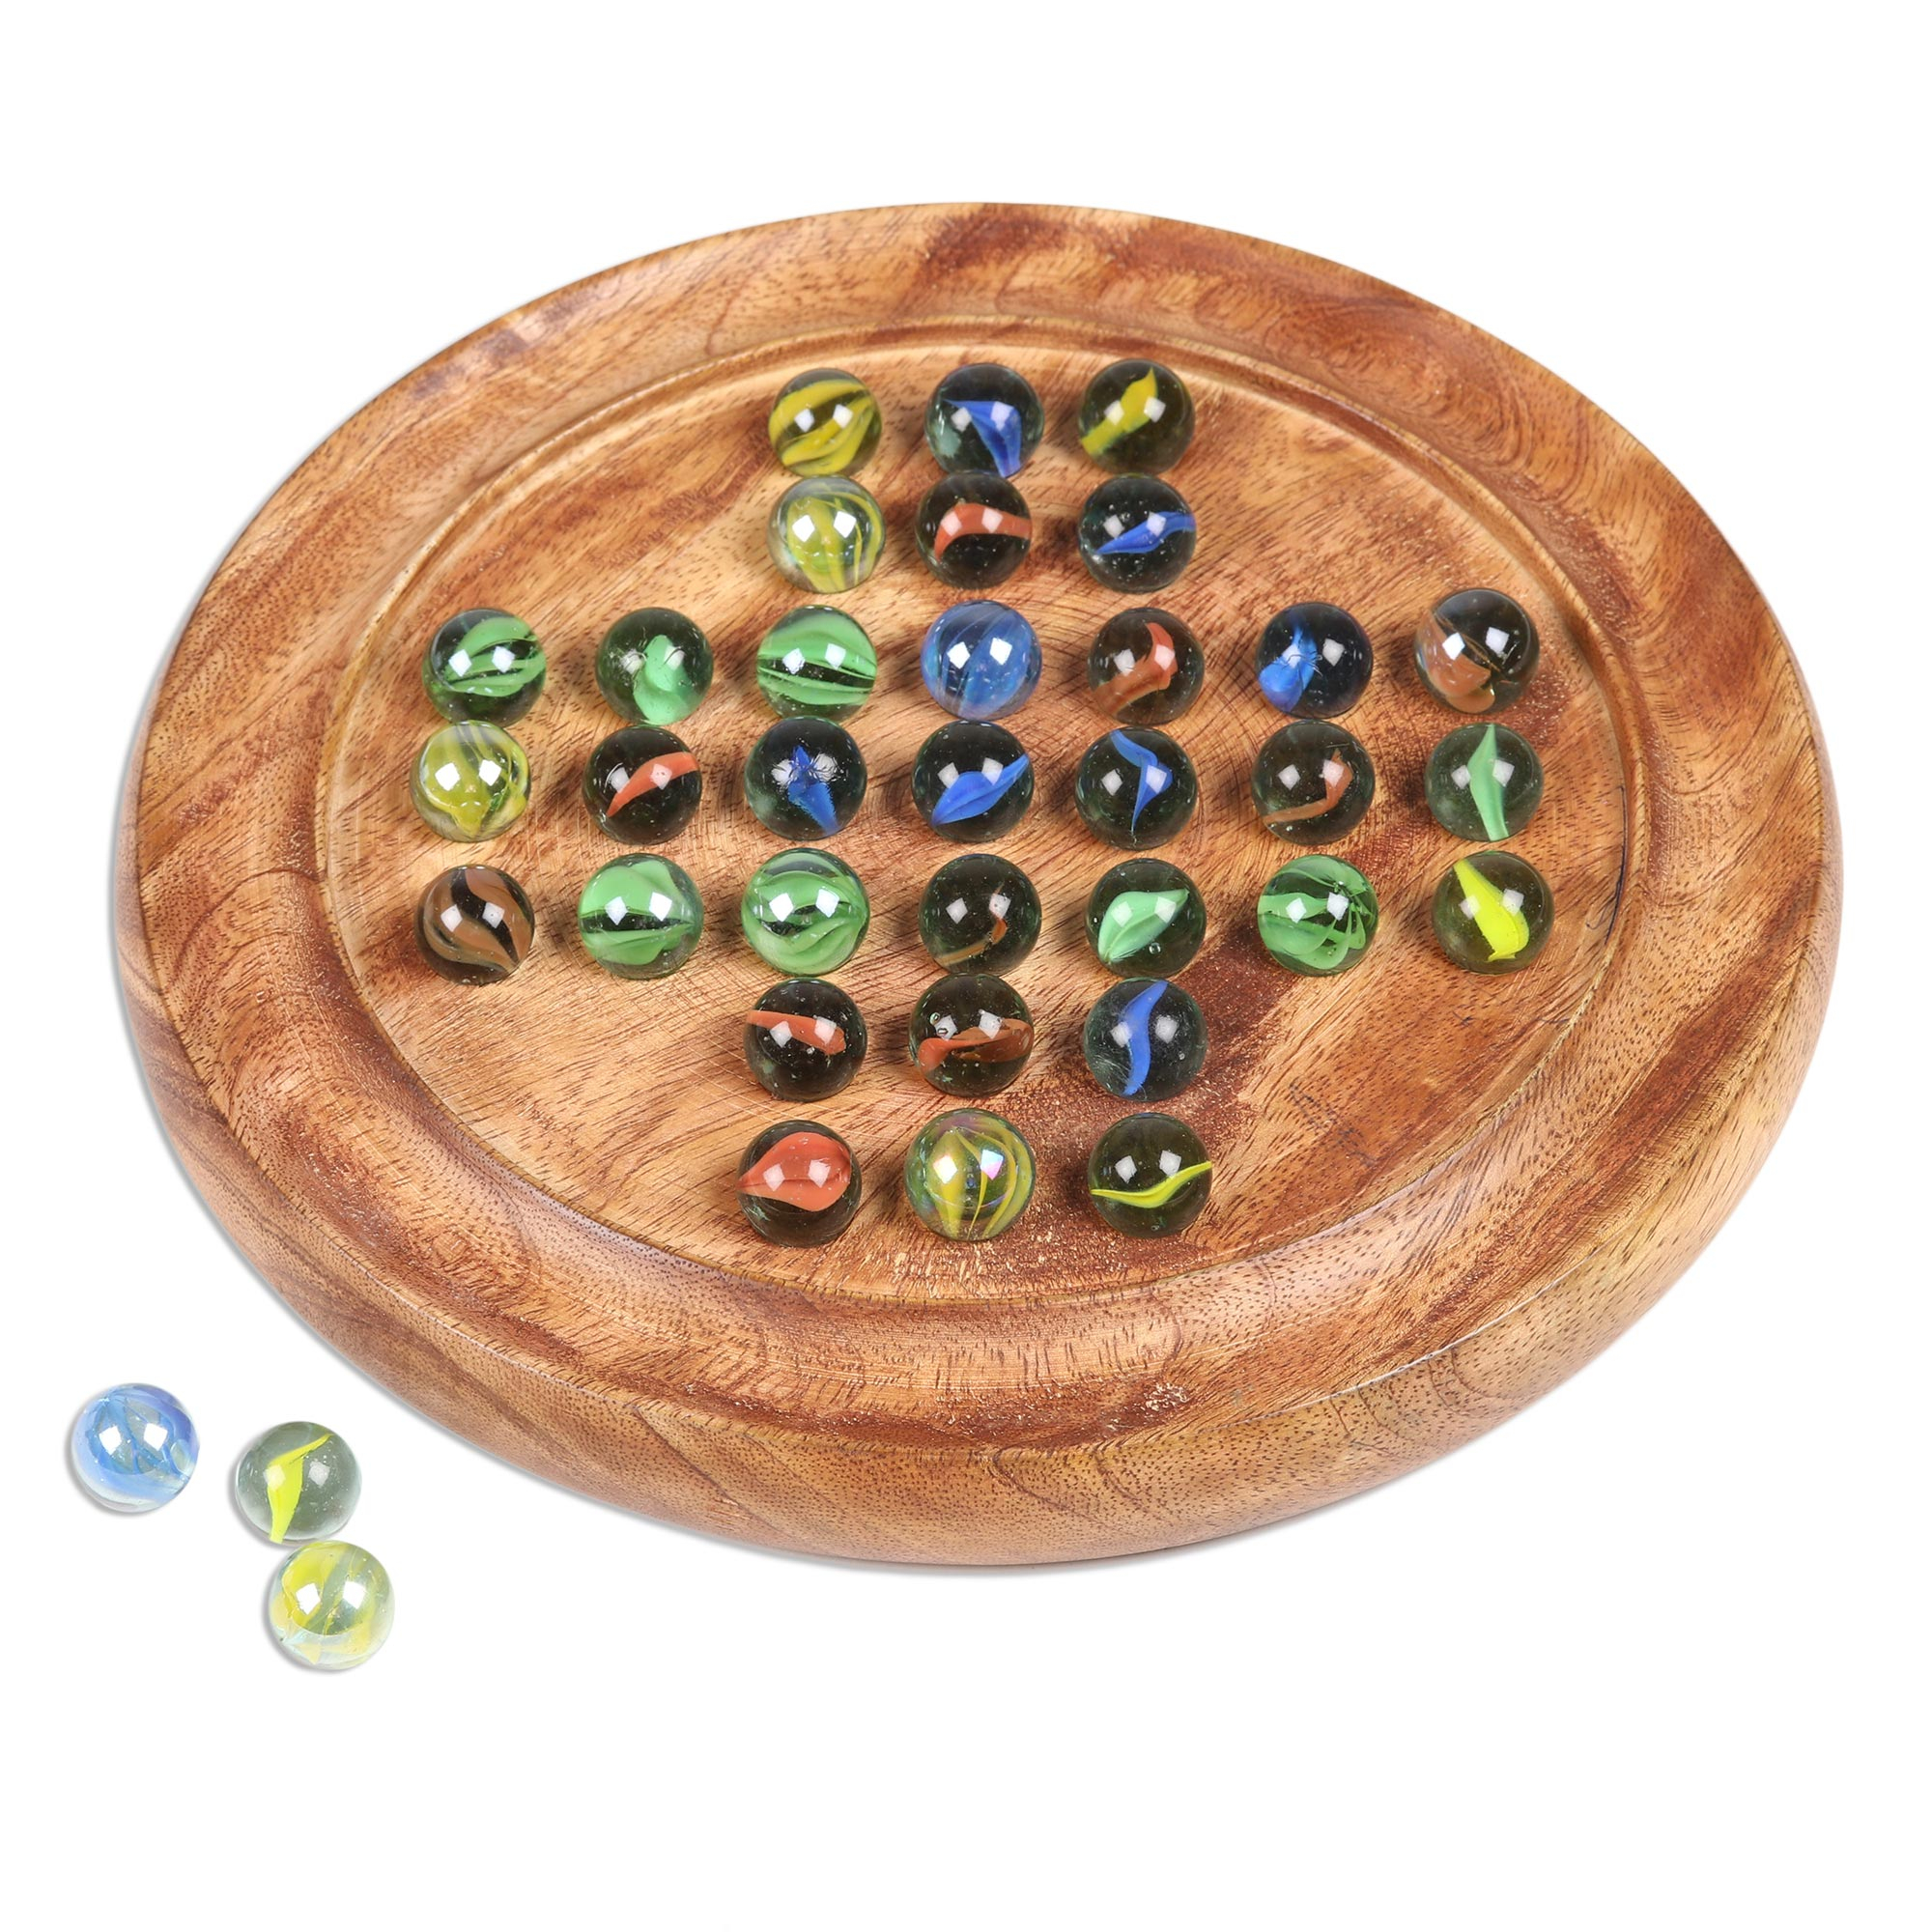 Flat Marbles used in board game. Stock Photo